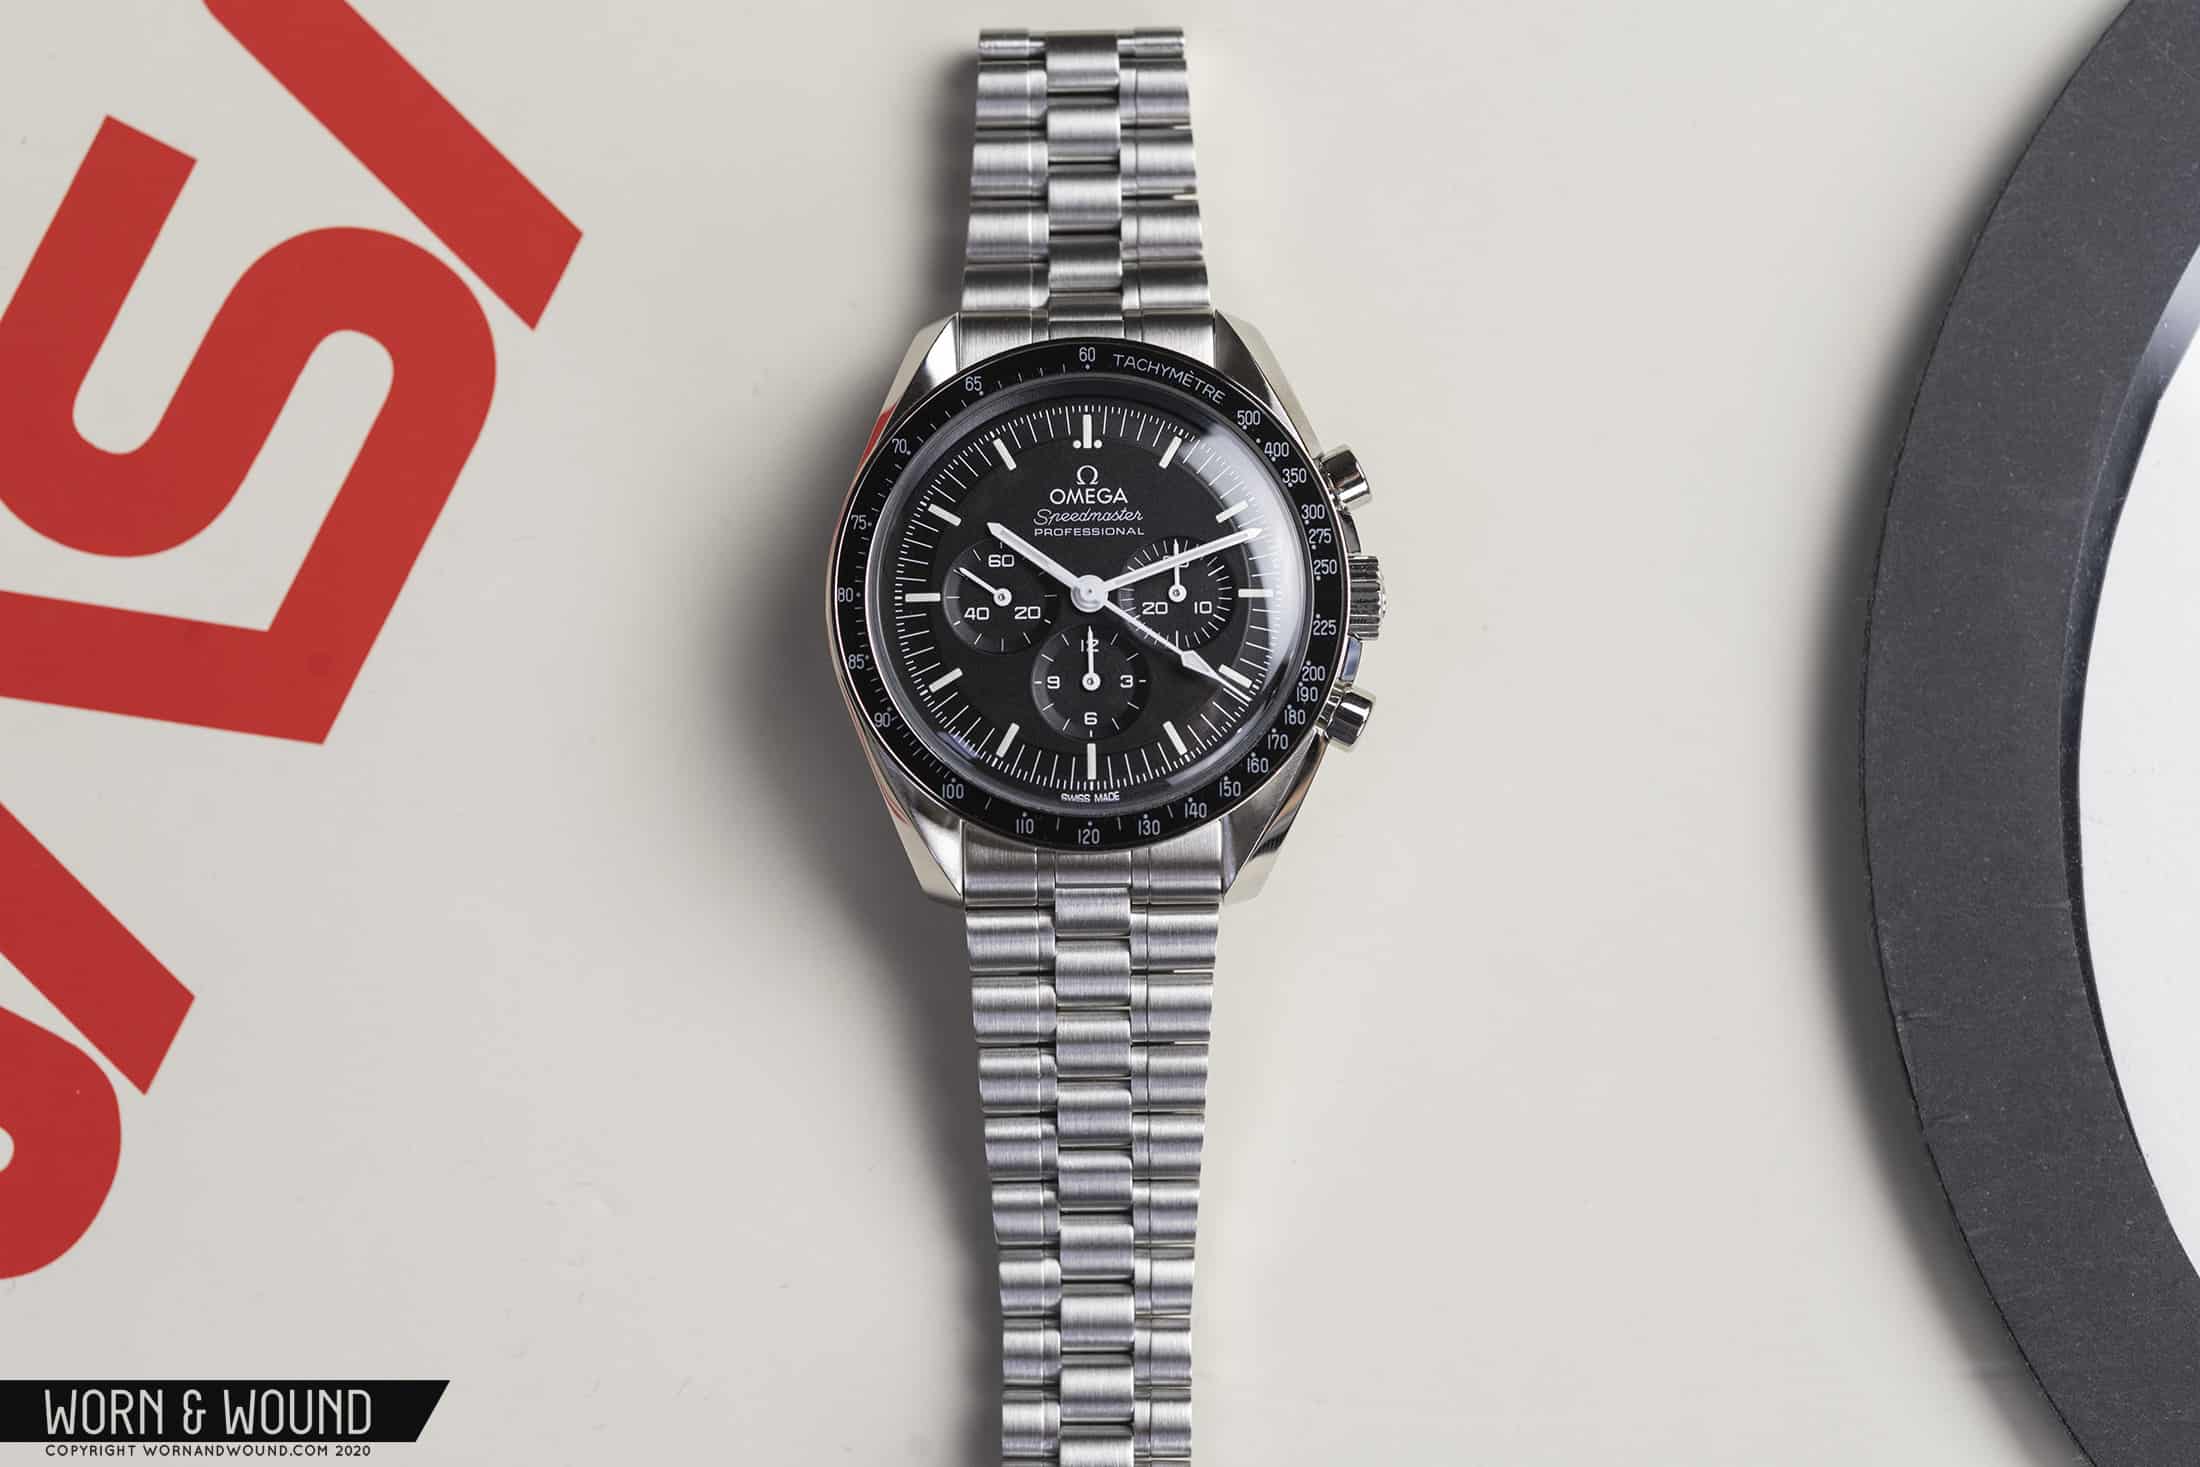 Omega Watch Price: 3 Factors to Consider